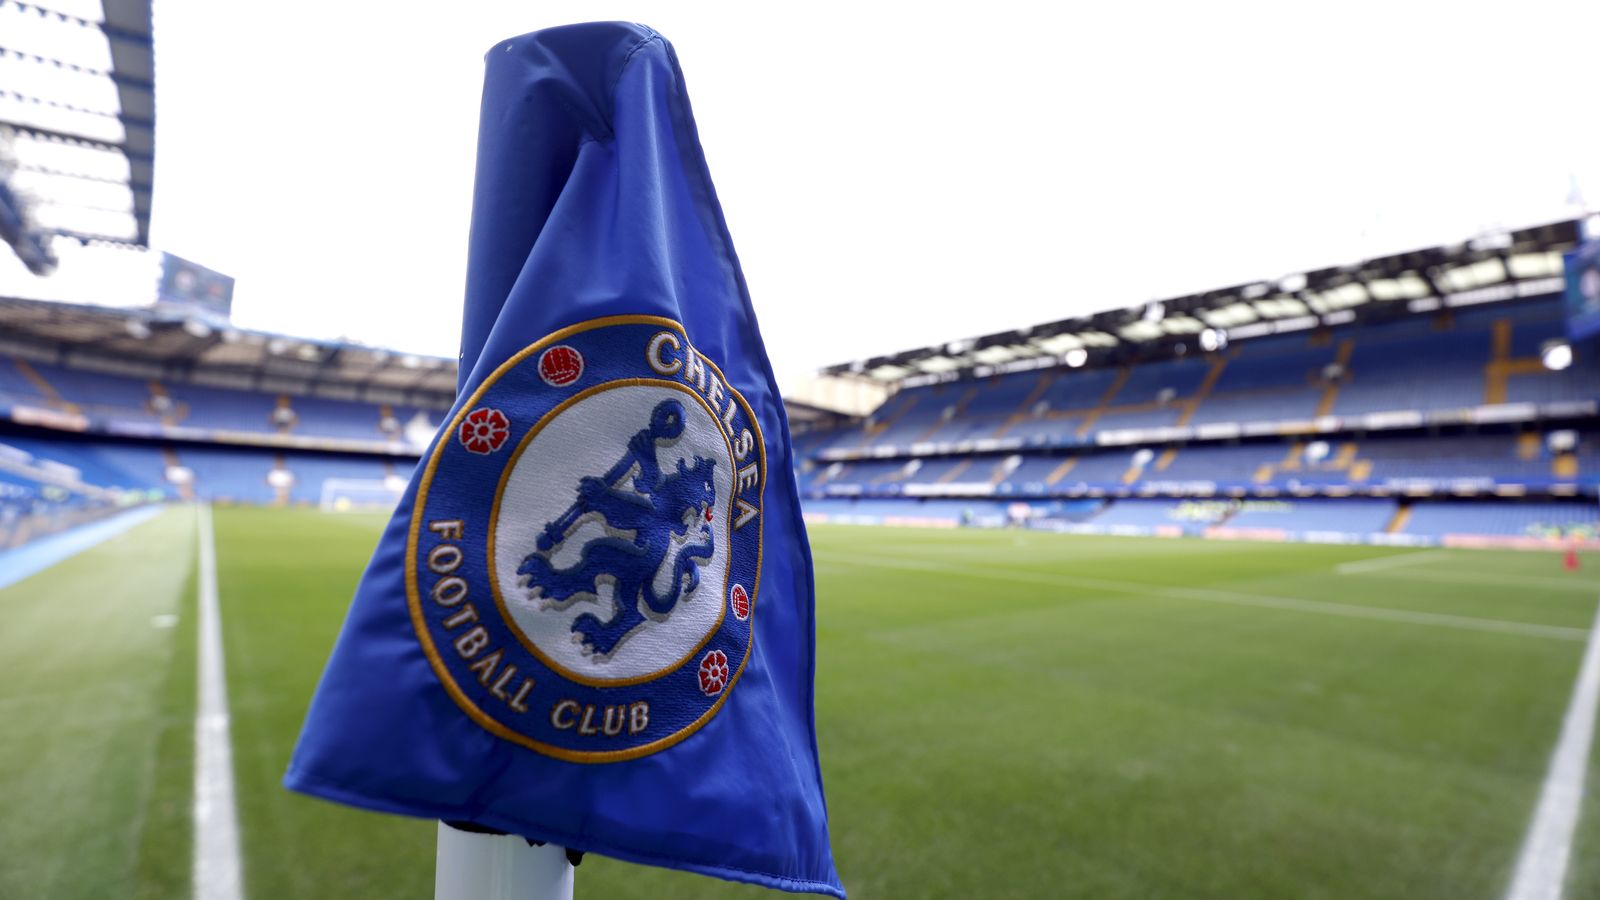 Damian Willoughby: Chelsea sack commercial director over ‘inappropriate messages’ sent to female agent